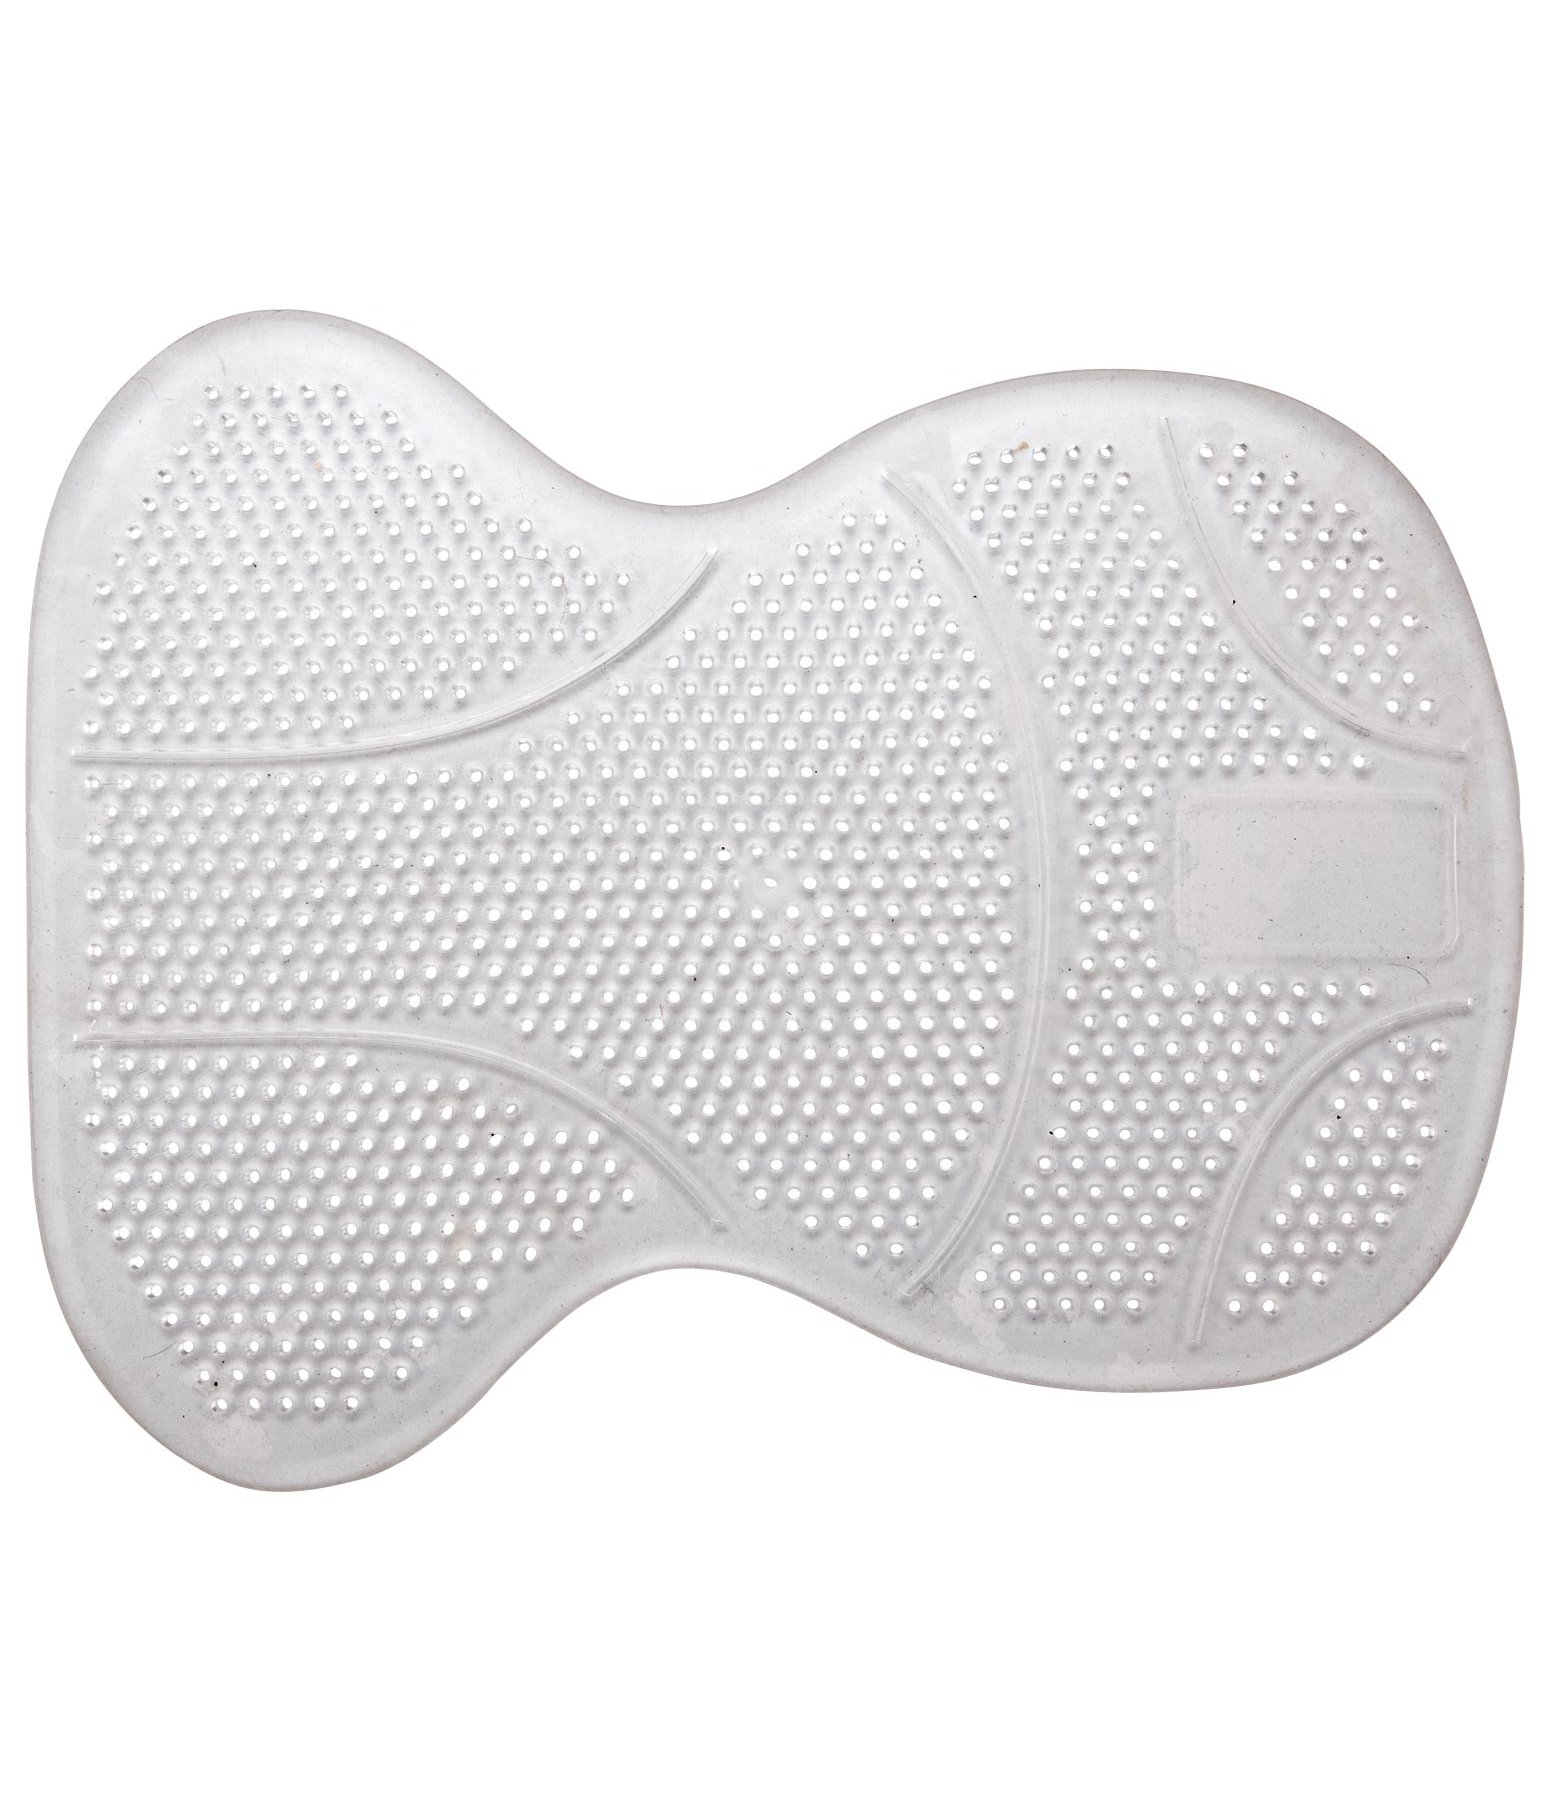 Gel Pad with Ventilation Holes